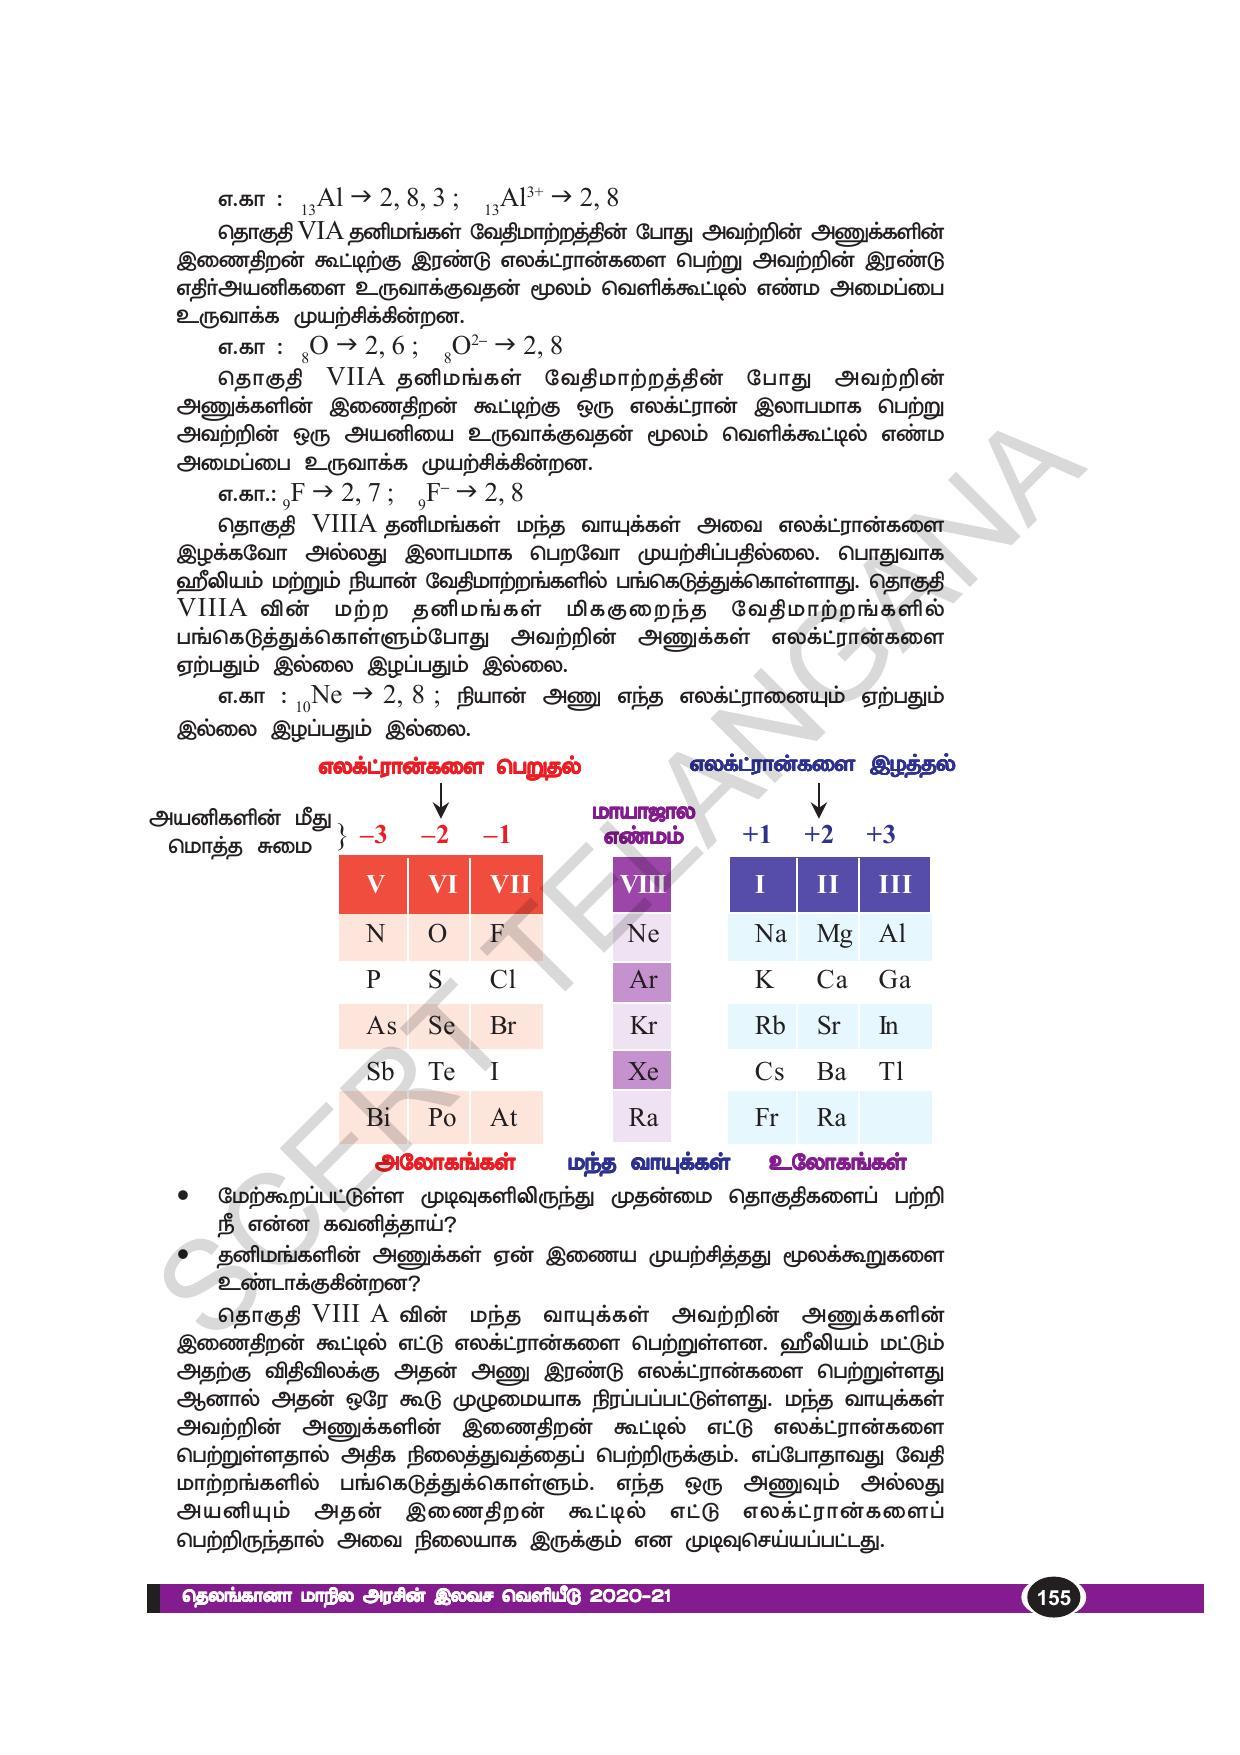 TS SCERT Class 10 Physical Science(Tamil Medium) Text Book - Page 167